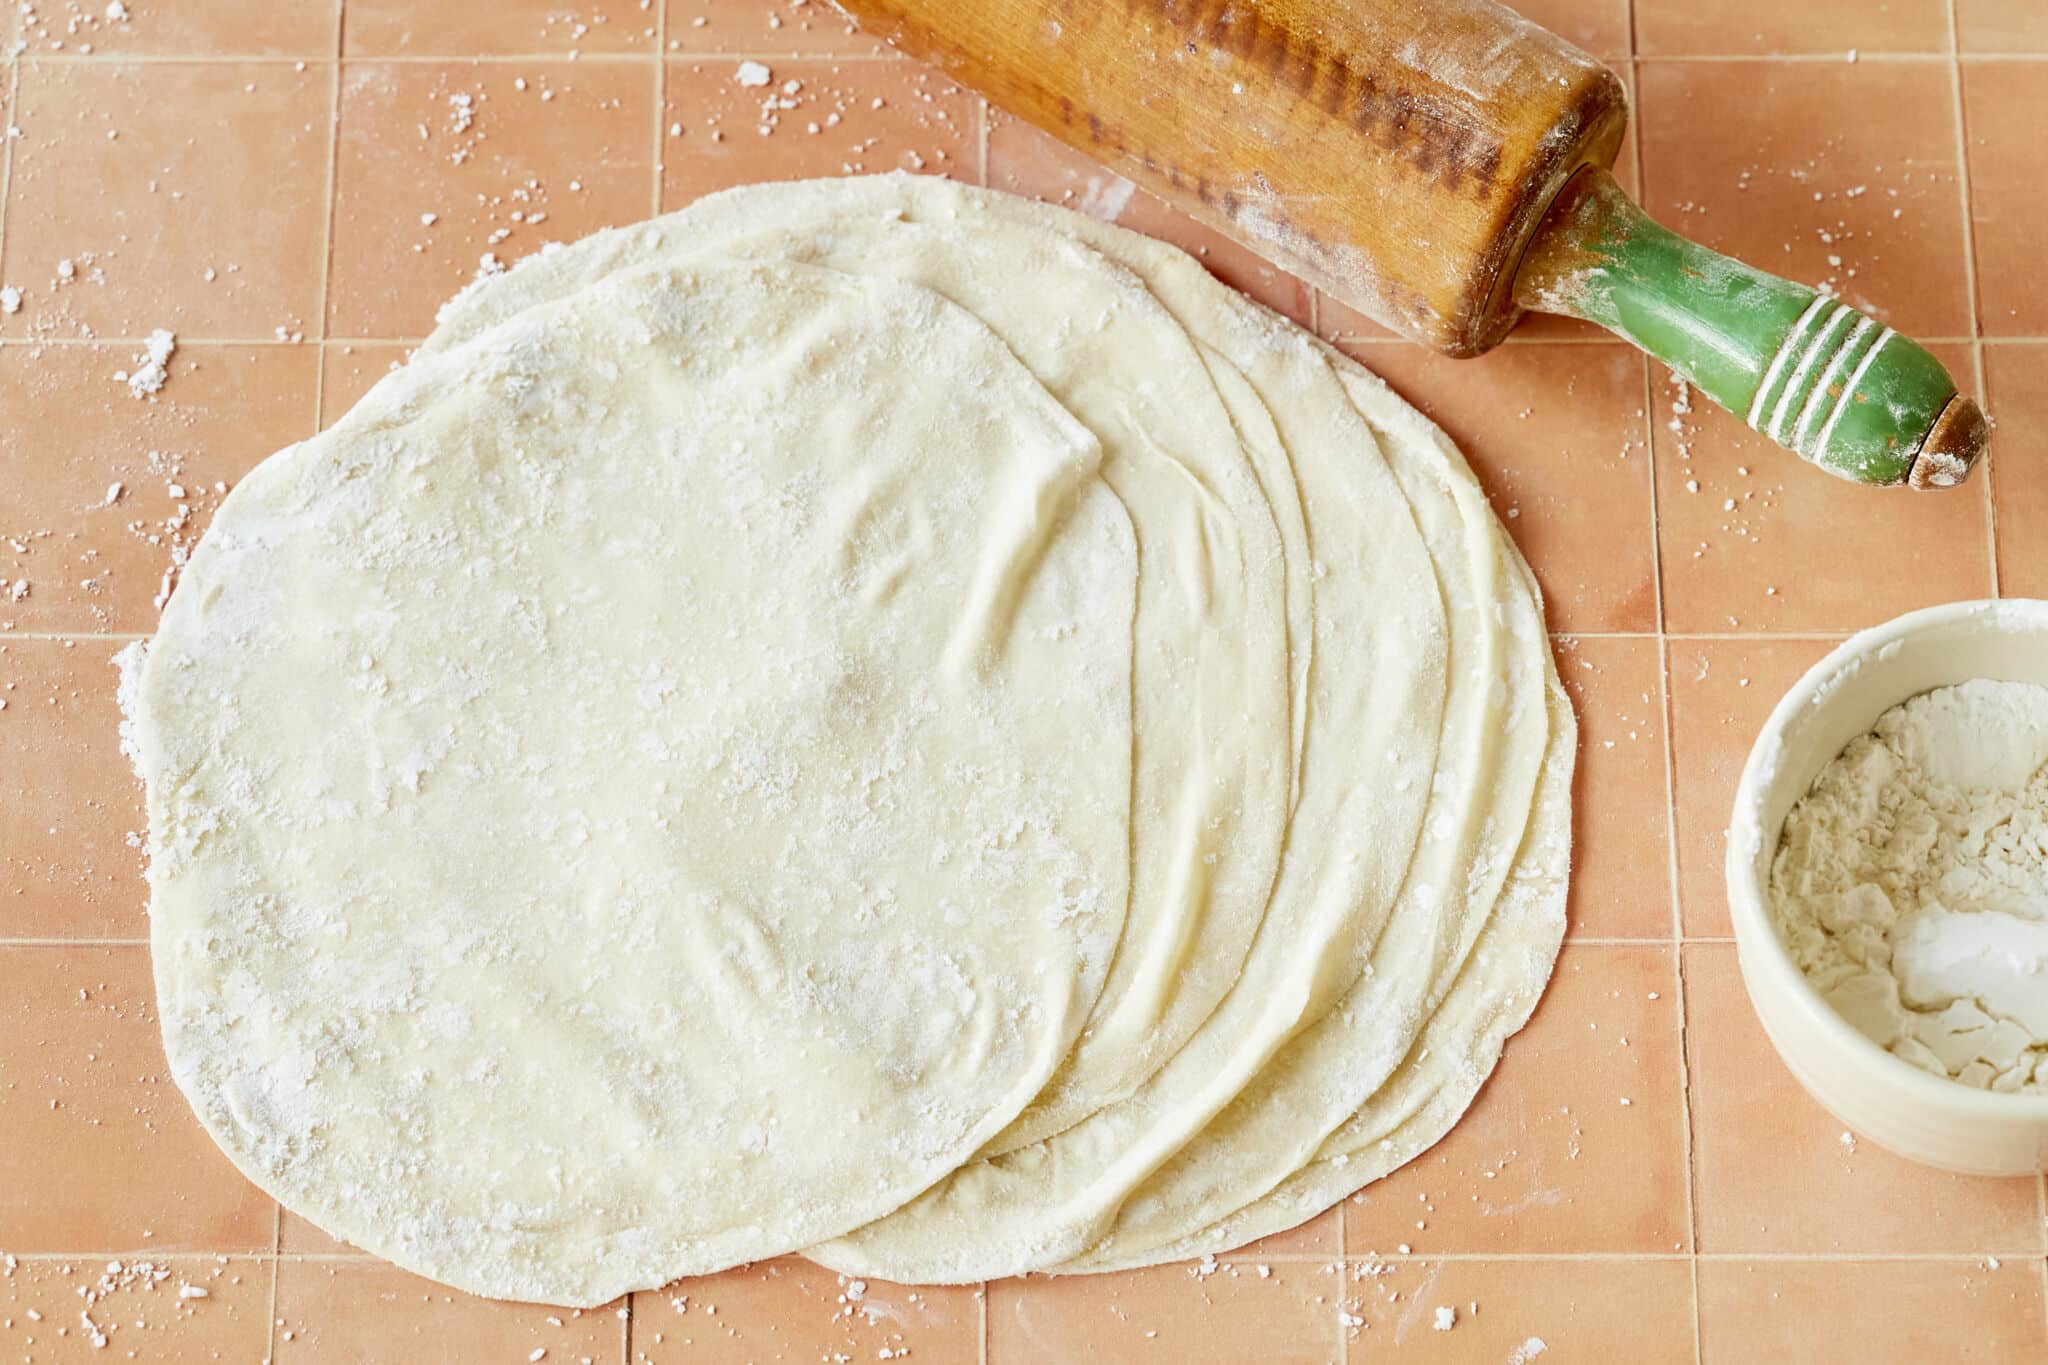 A stack of delicate, paper-thin Homemade Phyllo Dough (Fill Pastry) is dusted with flour. A bowl of extra flour and a rolling pin are on the side.